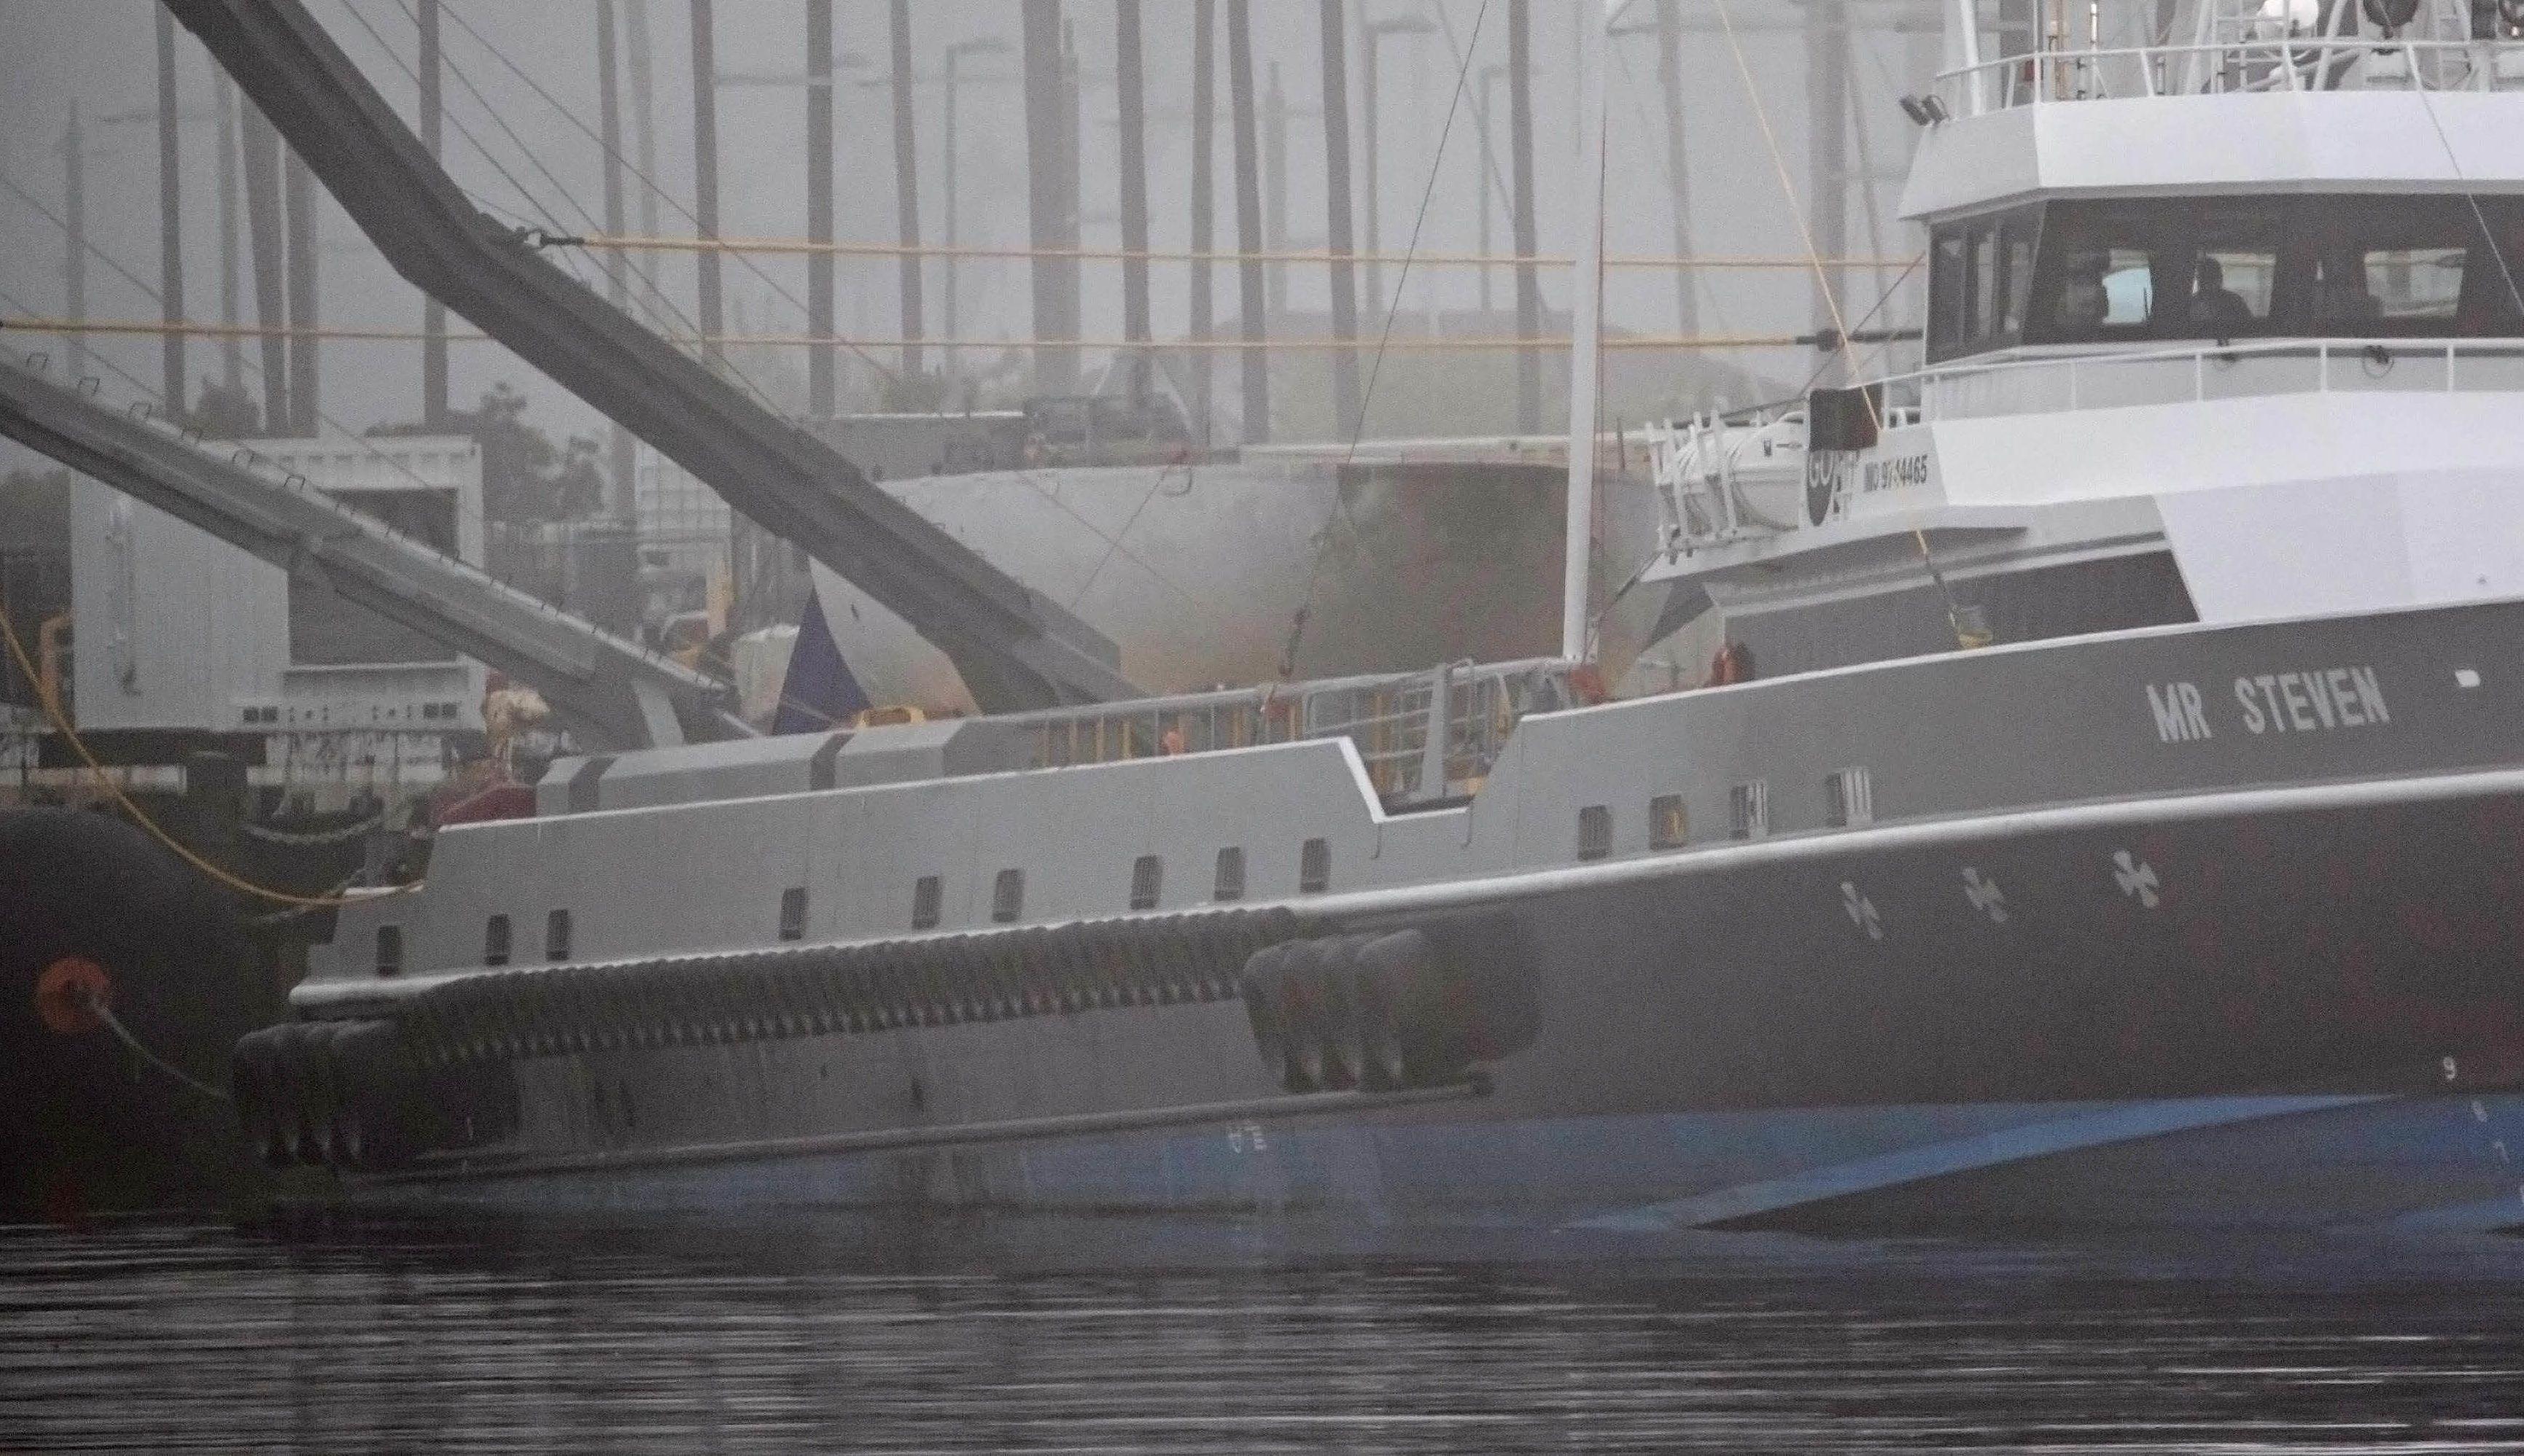 SpaceX Fairing Logo - SpaceX returns intact fairing half on clawboat in post-launch surprise